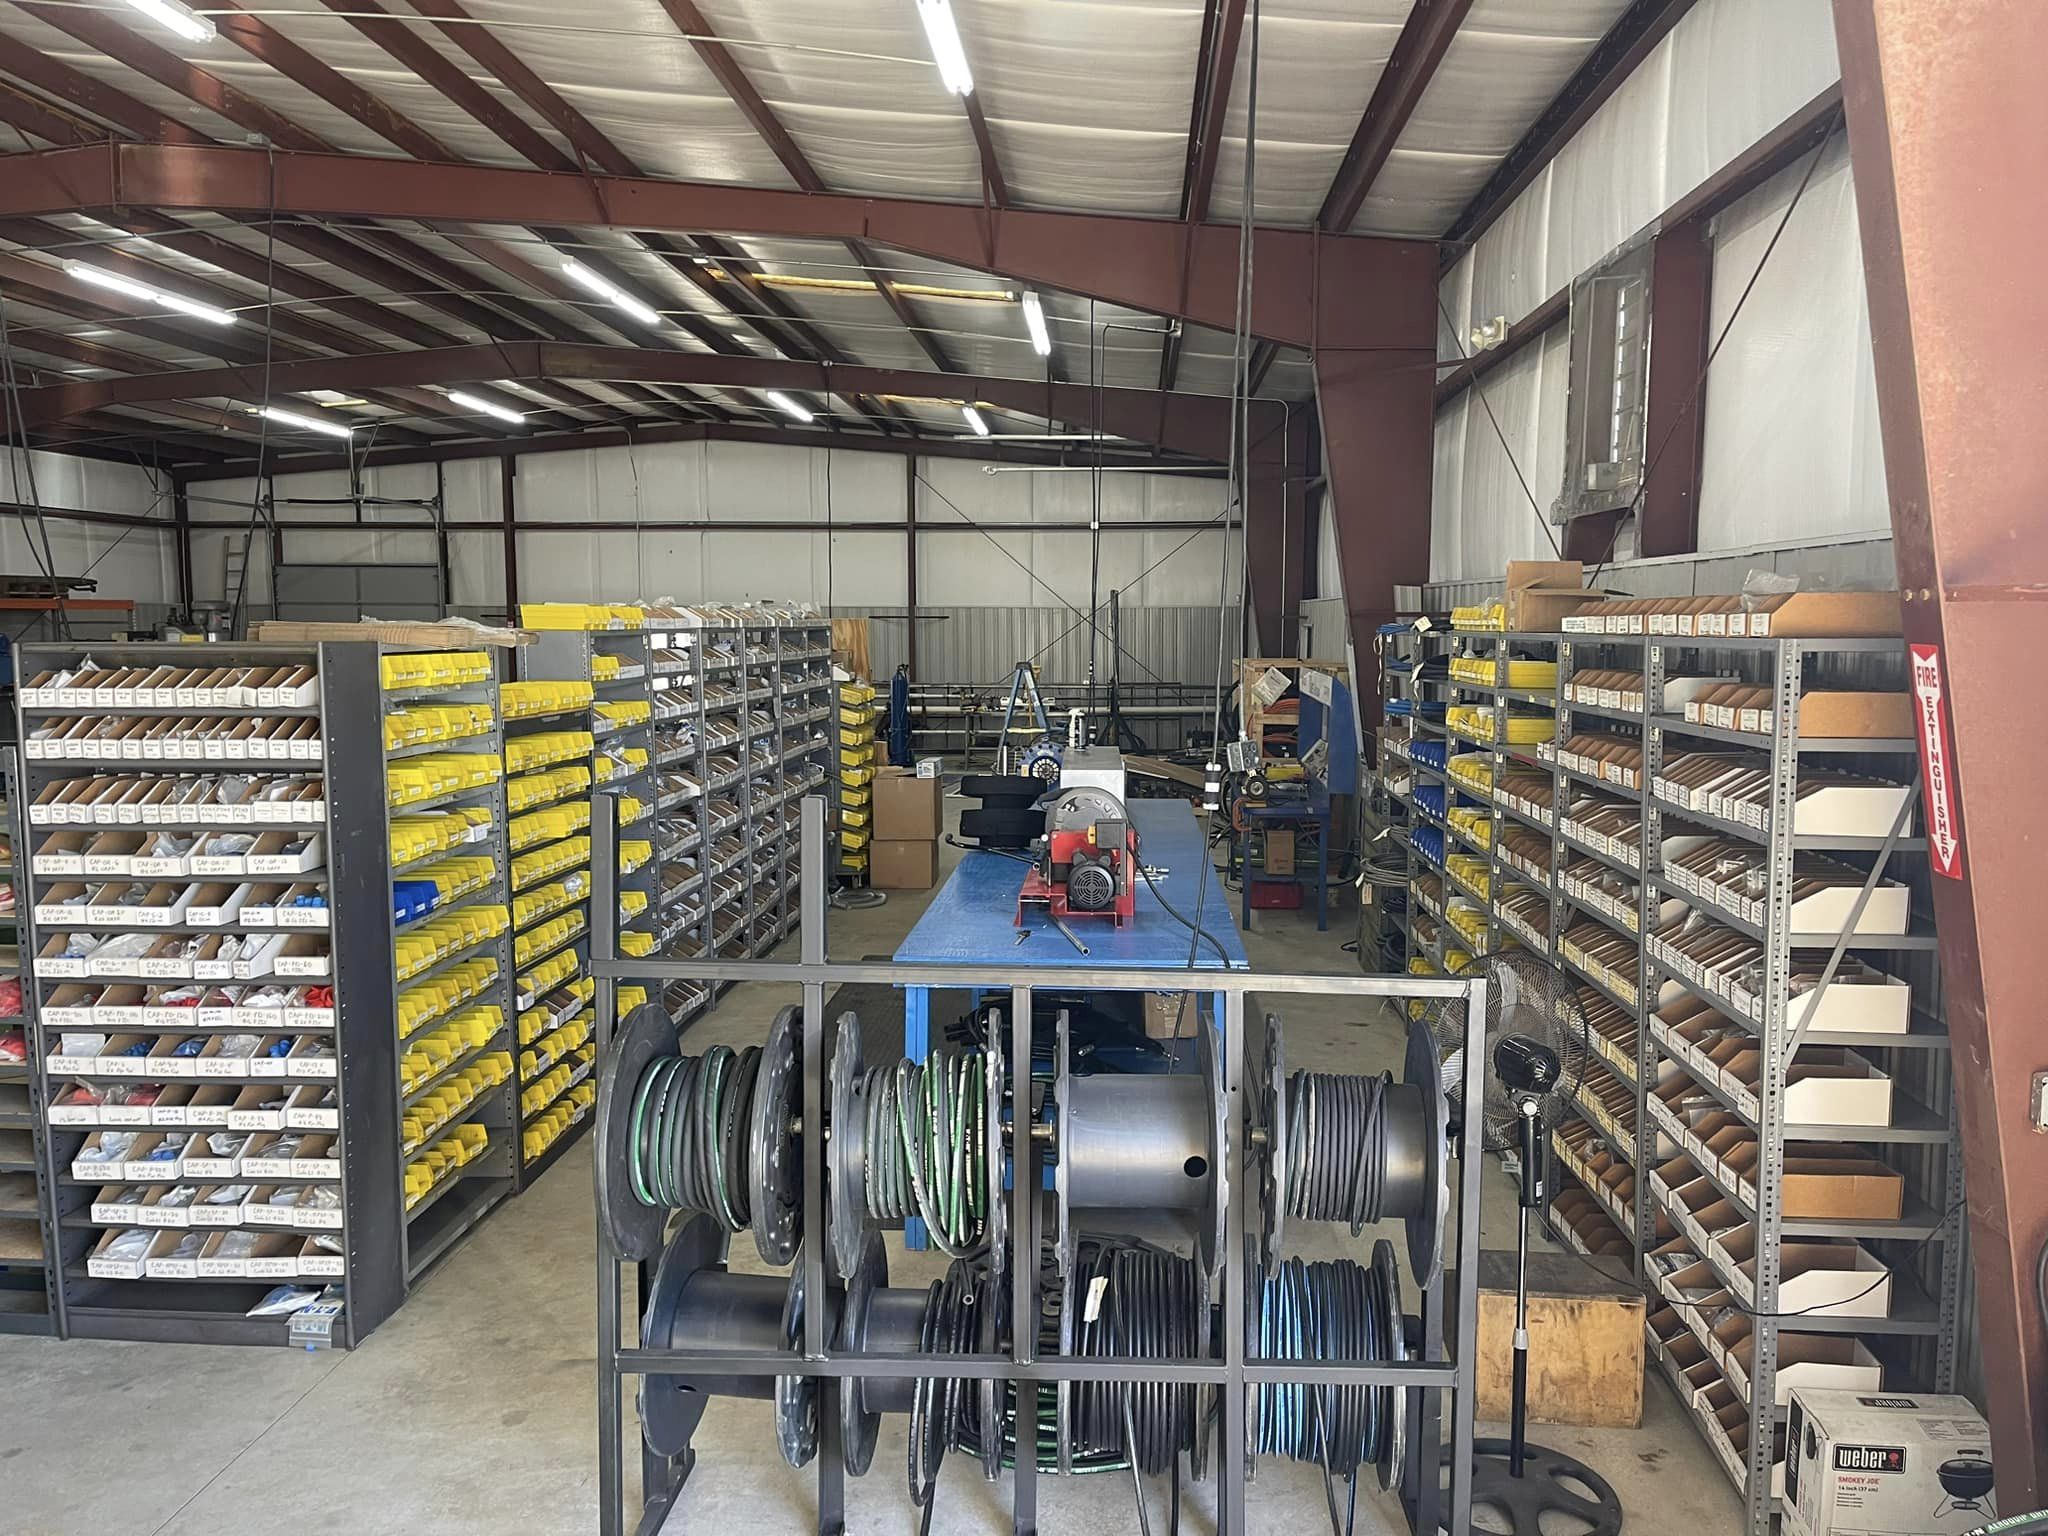 Hydraulic Fabrication & Service in Raleigh, NC